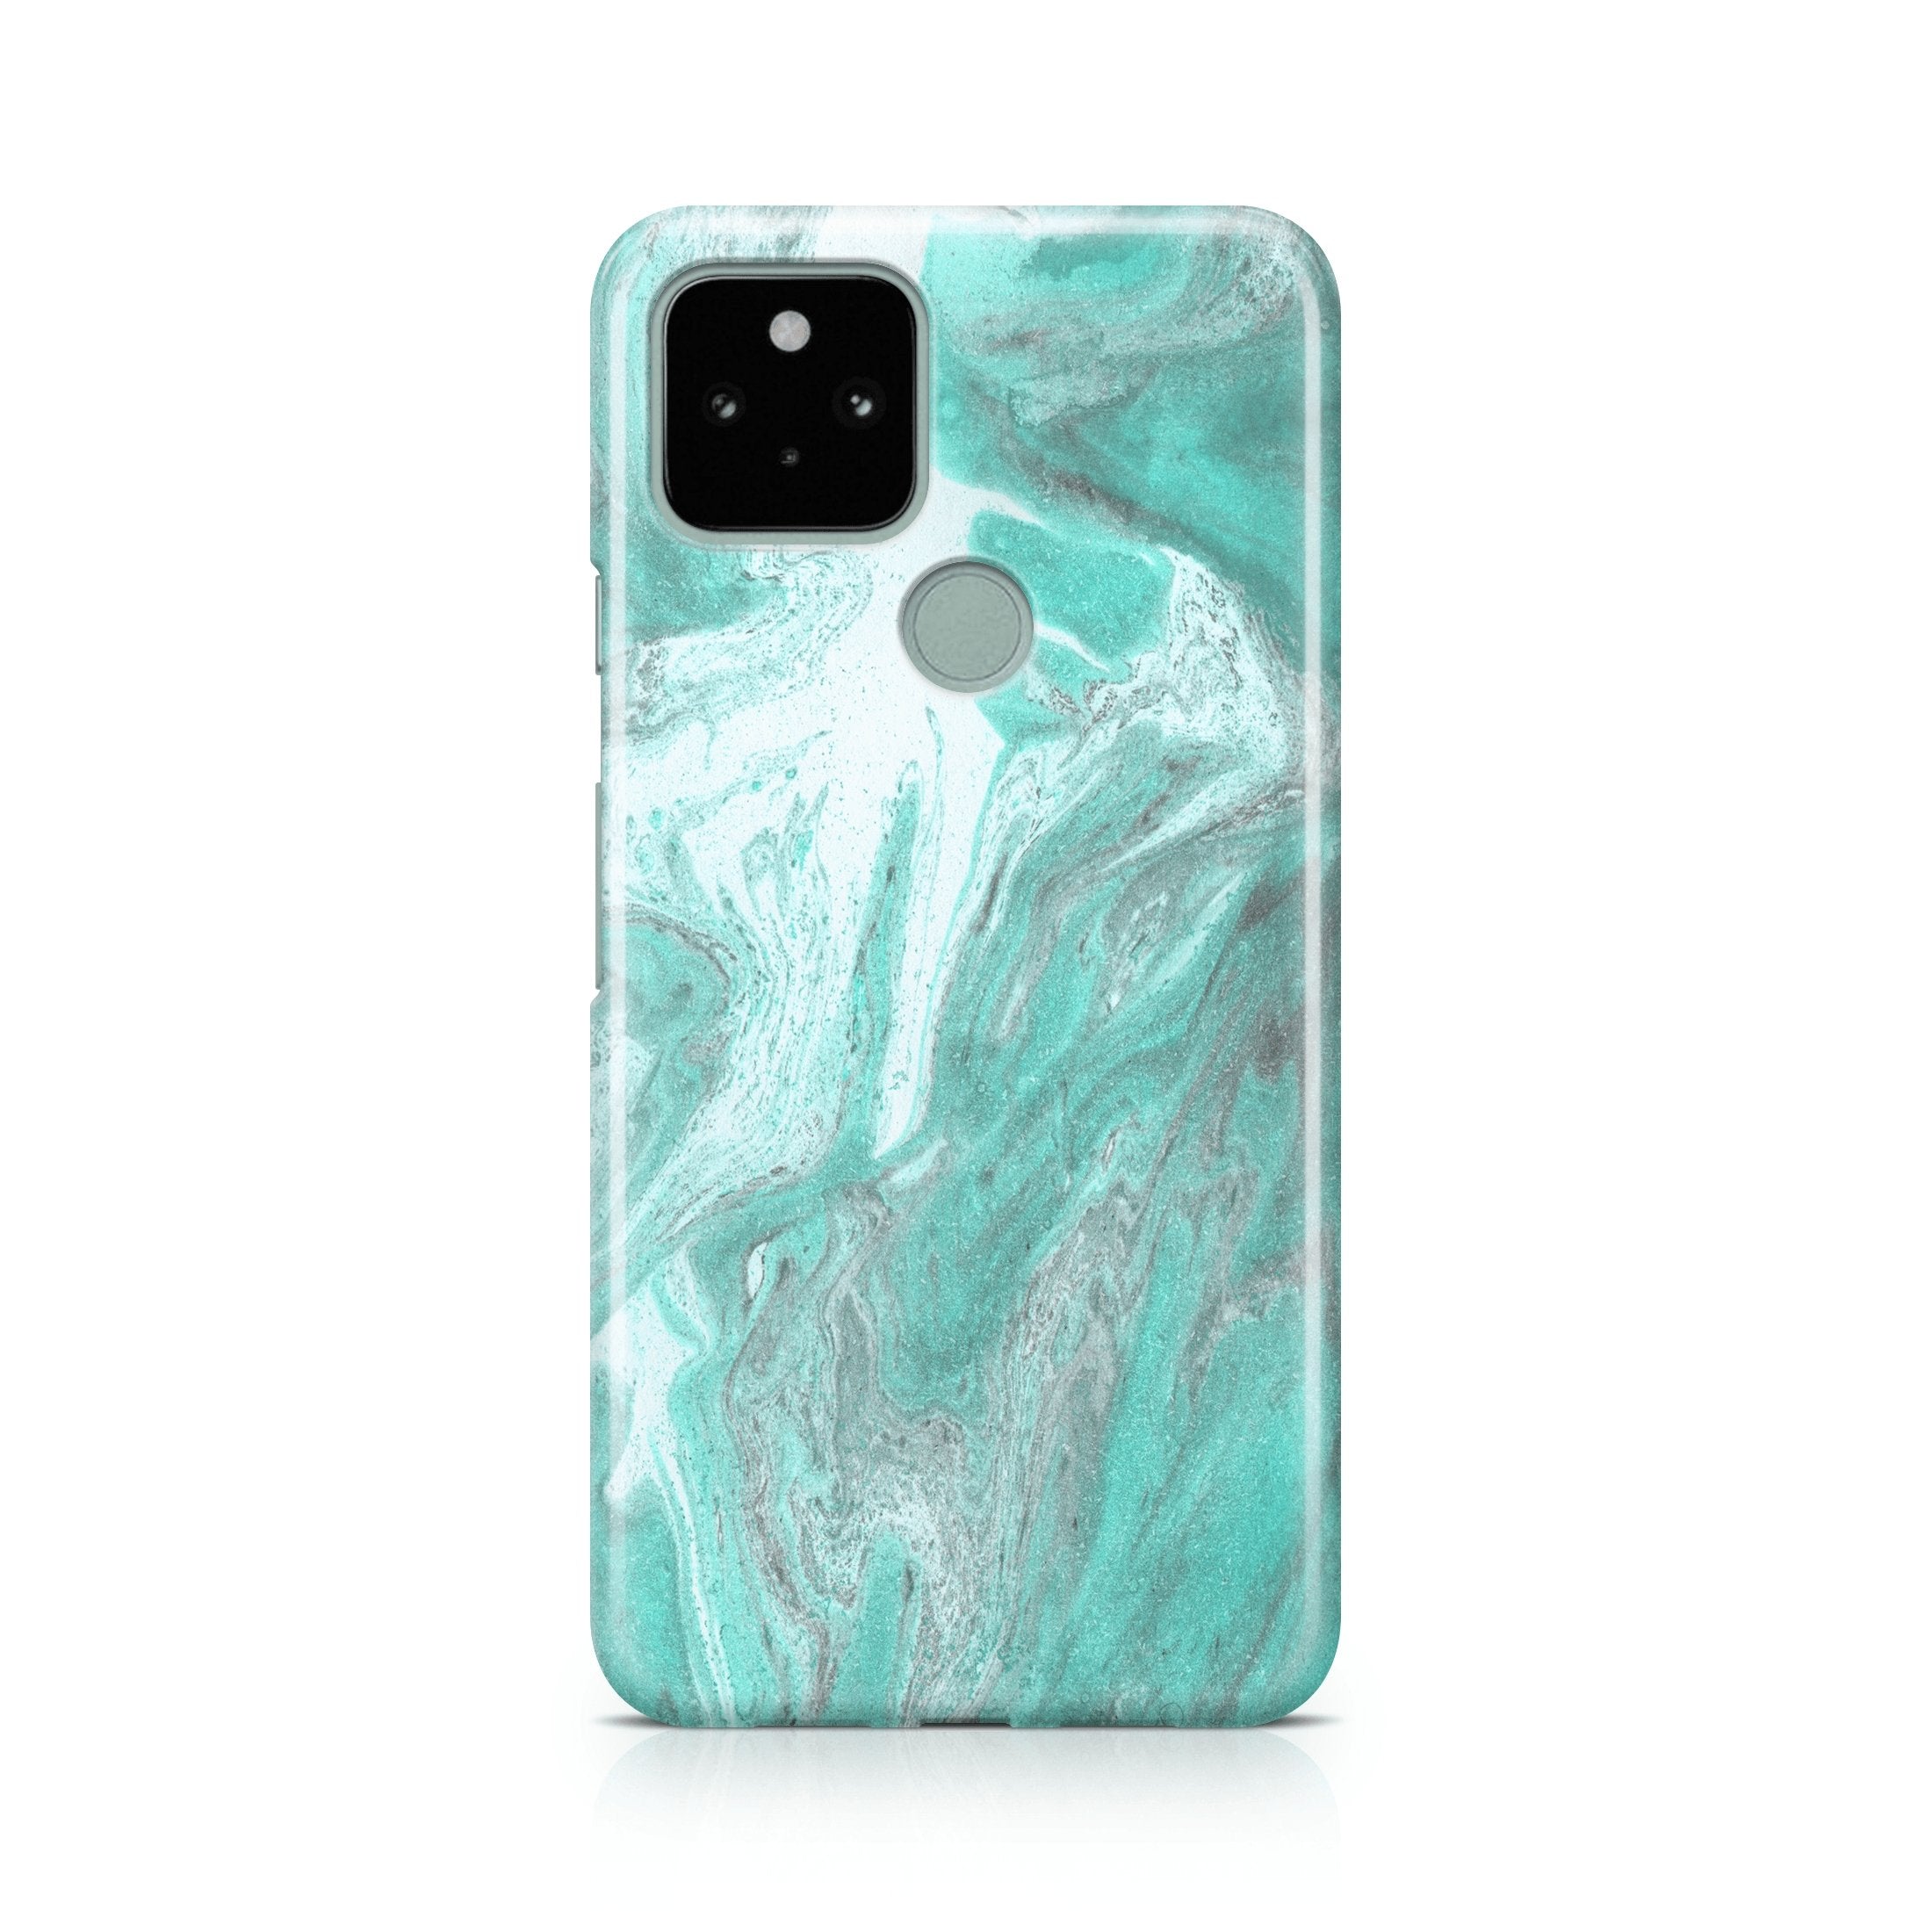 Aqua Green Marble - Google phone case designs by CaseSwagger